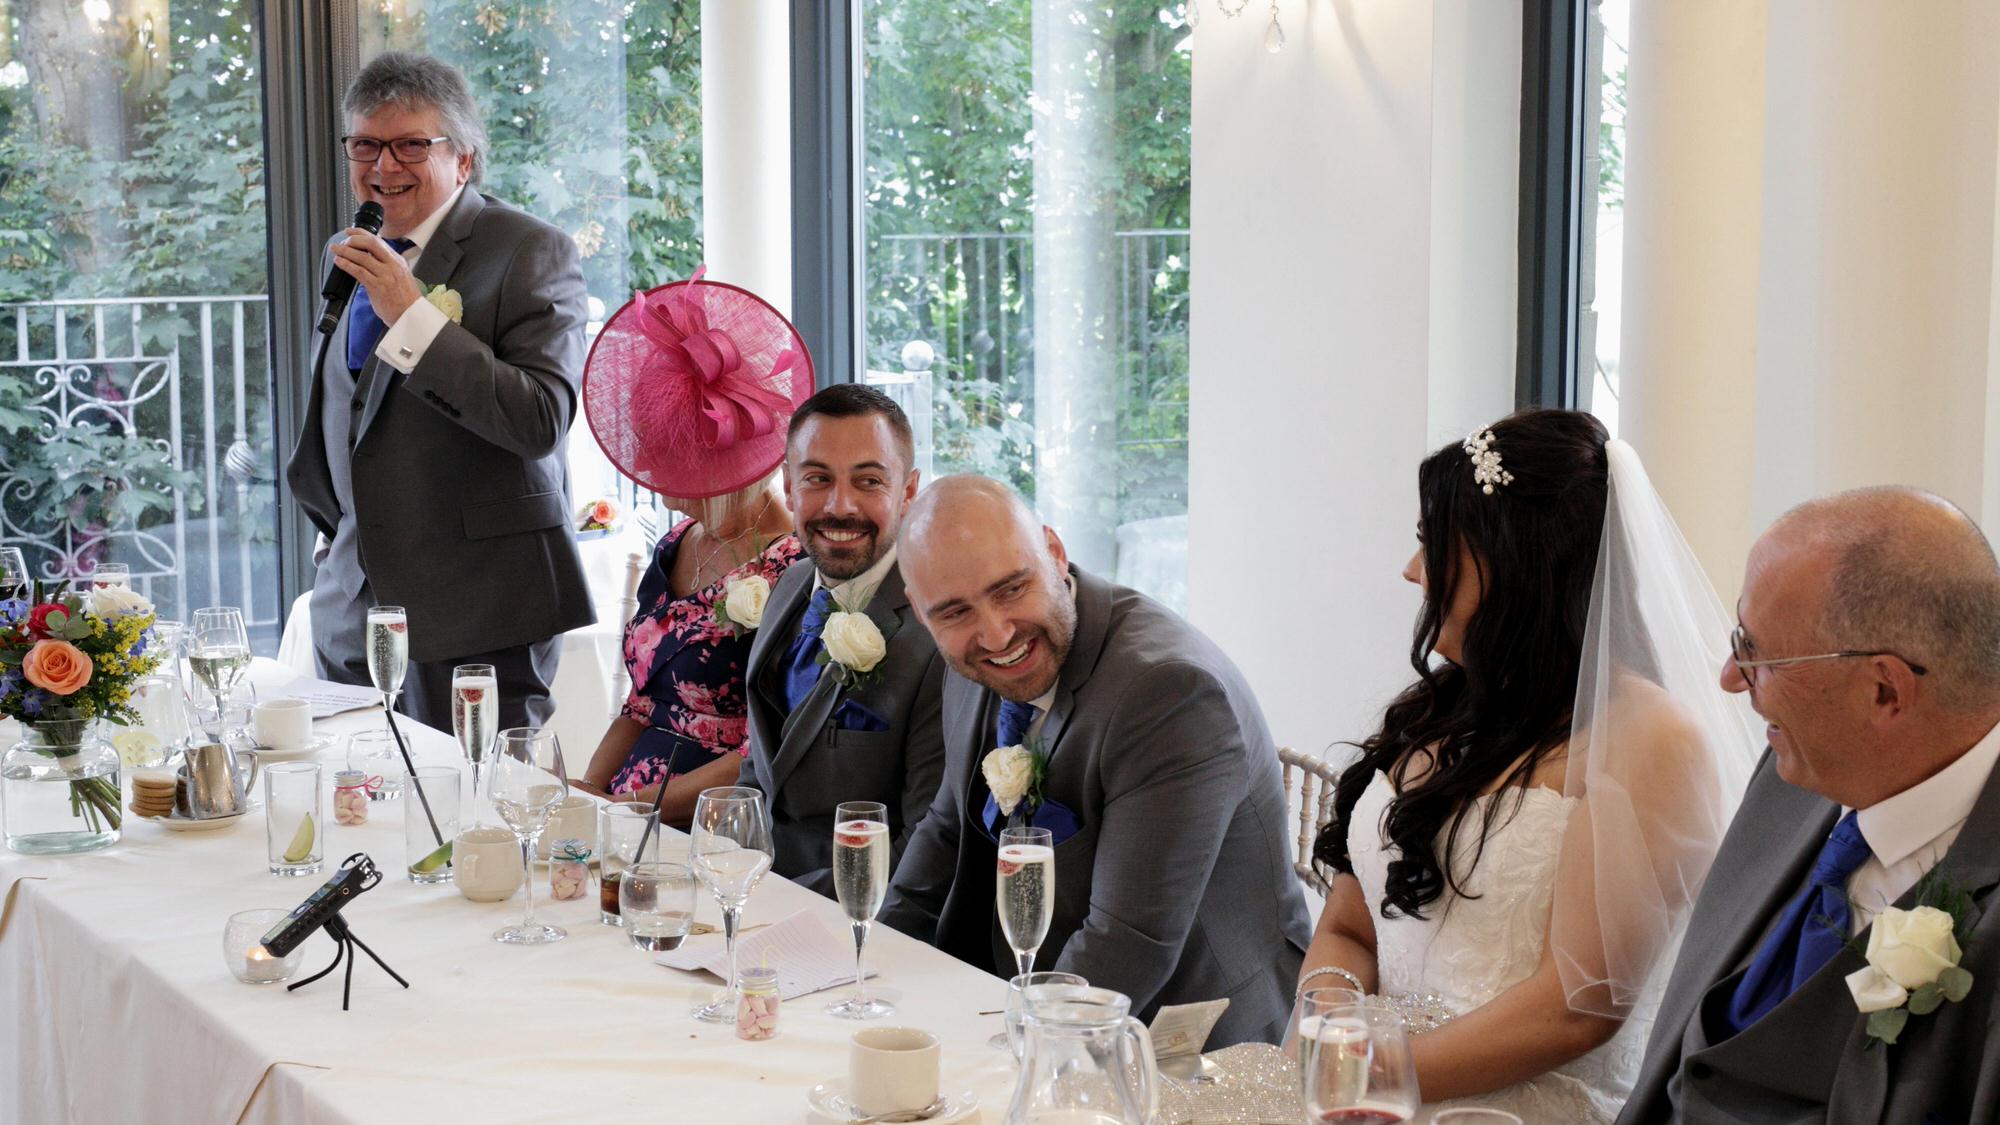 the top table laugh during the father of the bride speech